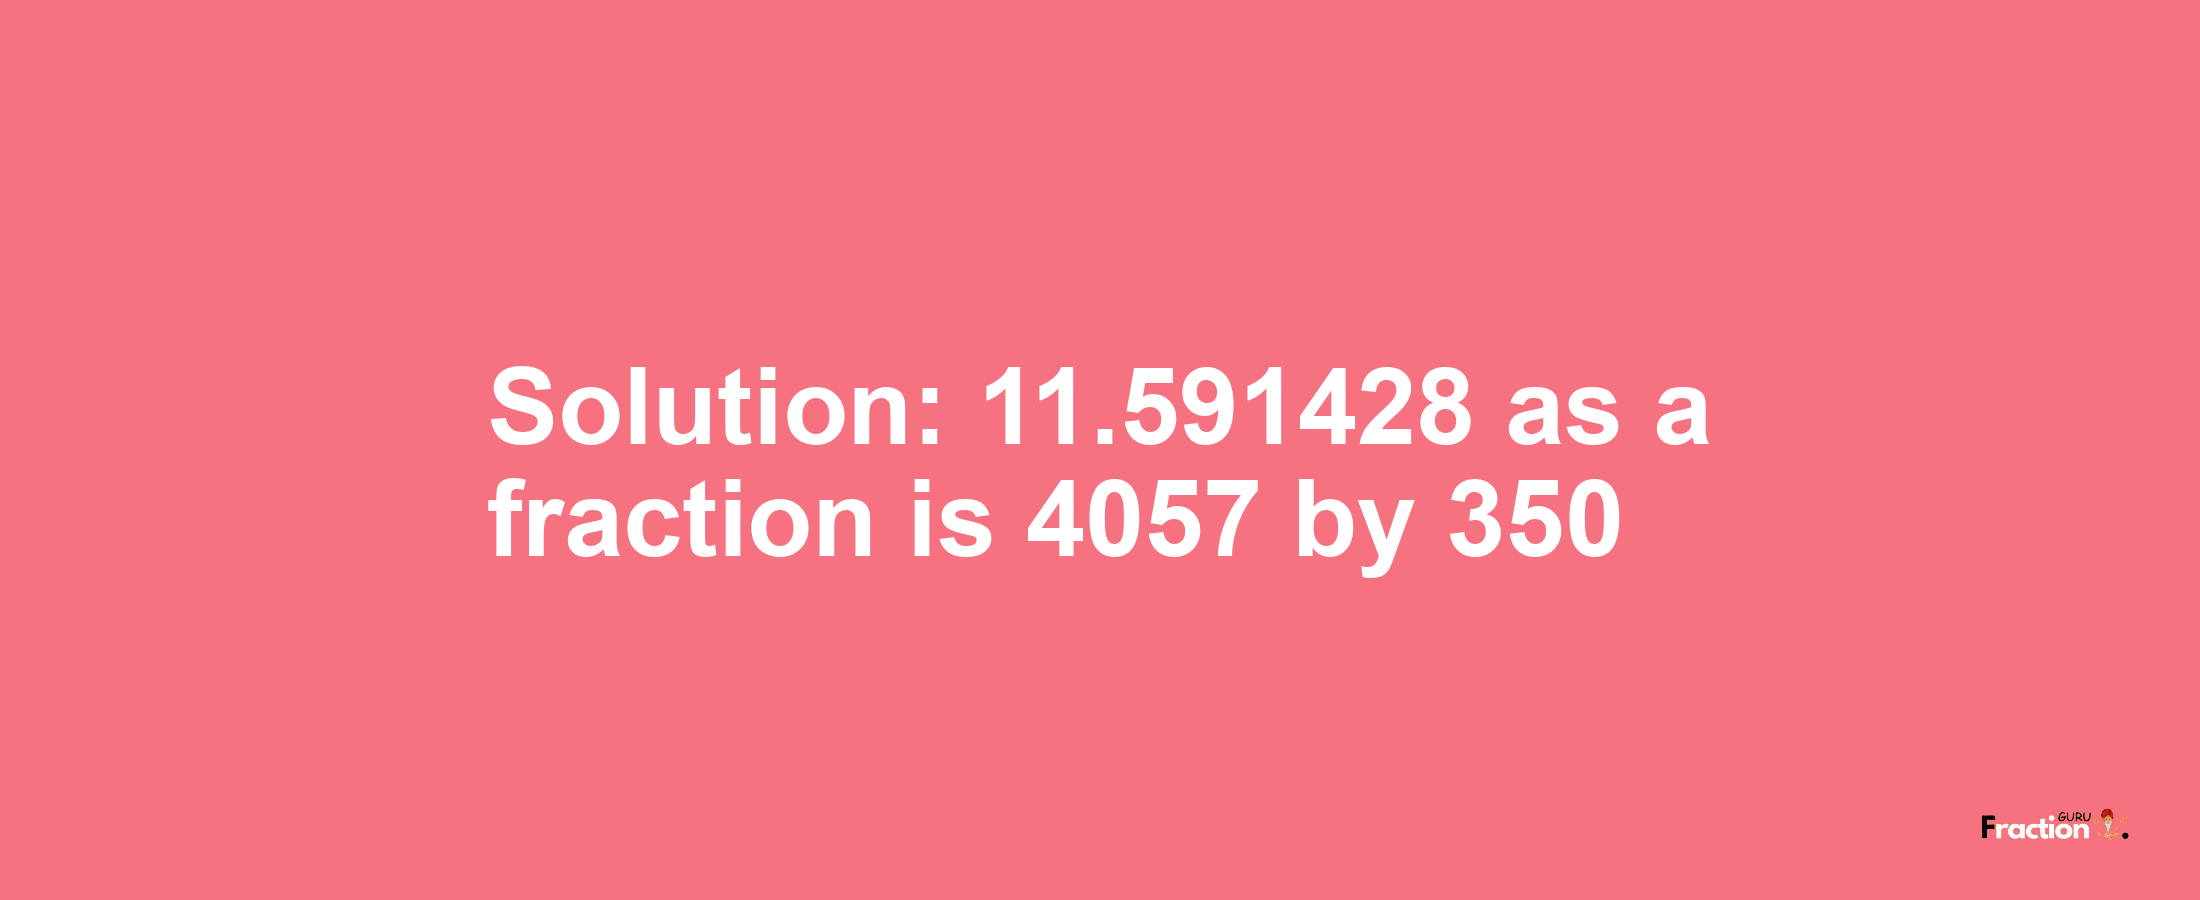 Solution:11.591428 as a fraction is 4057/350